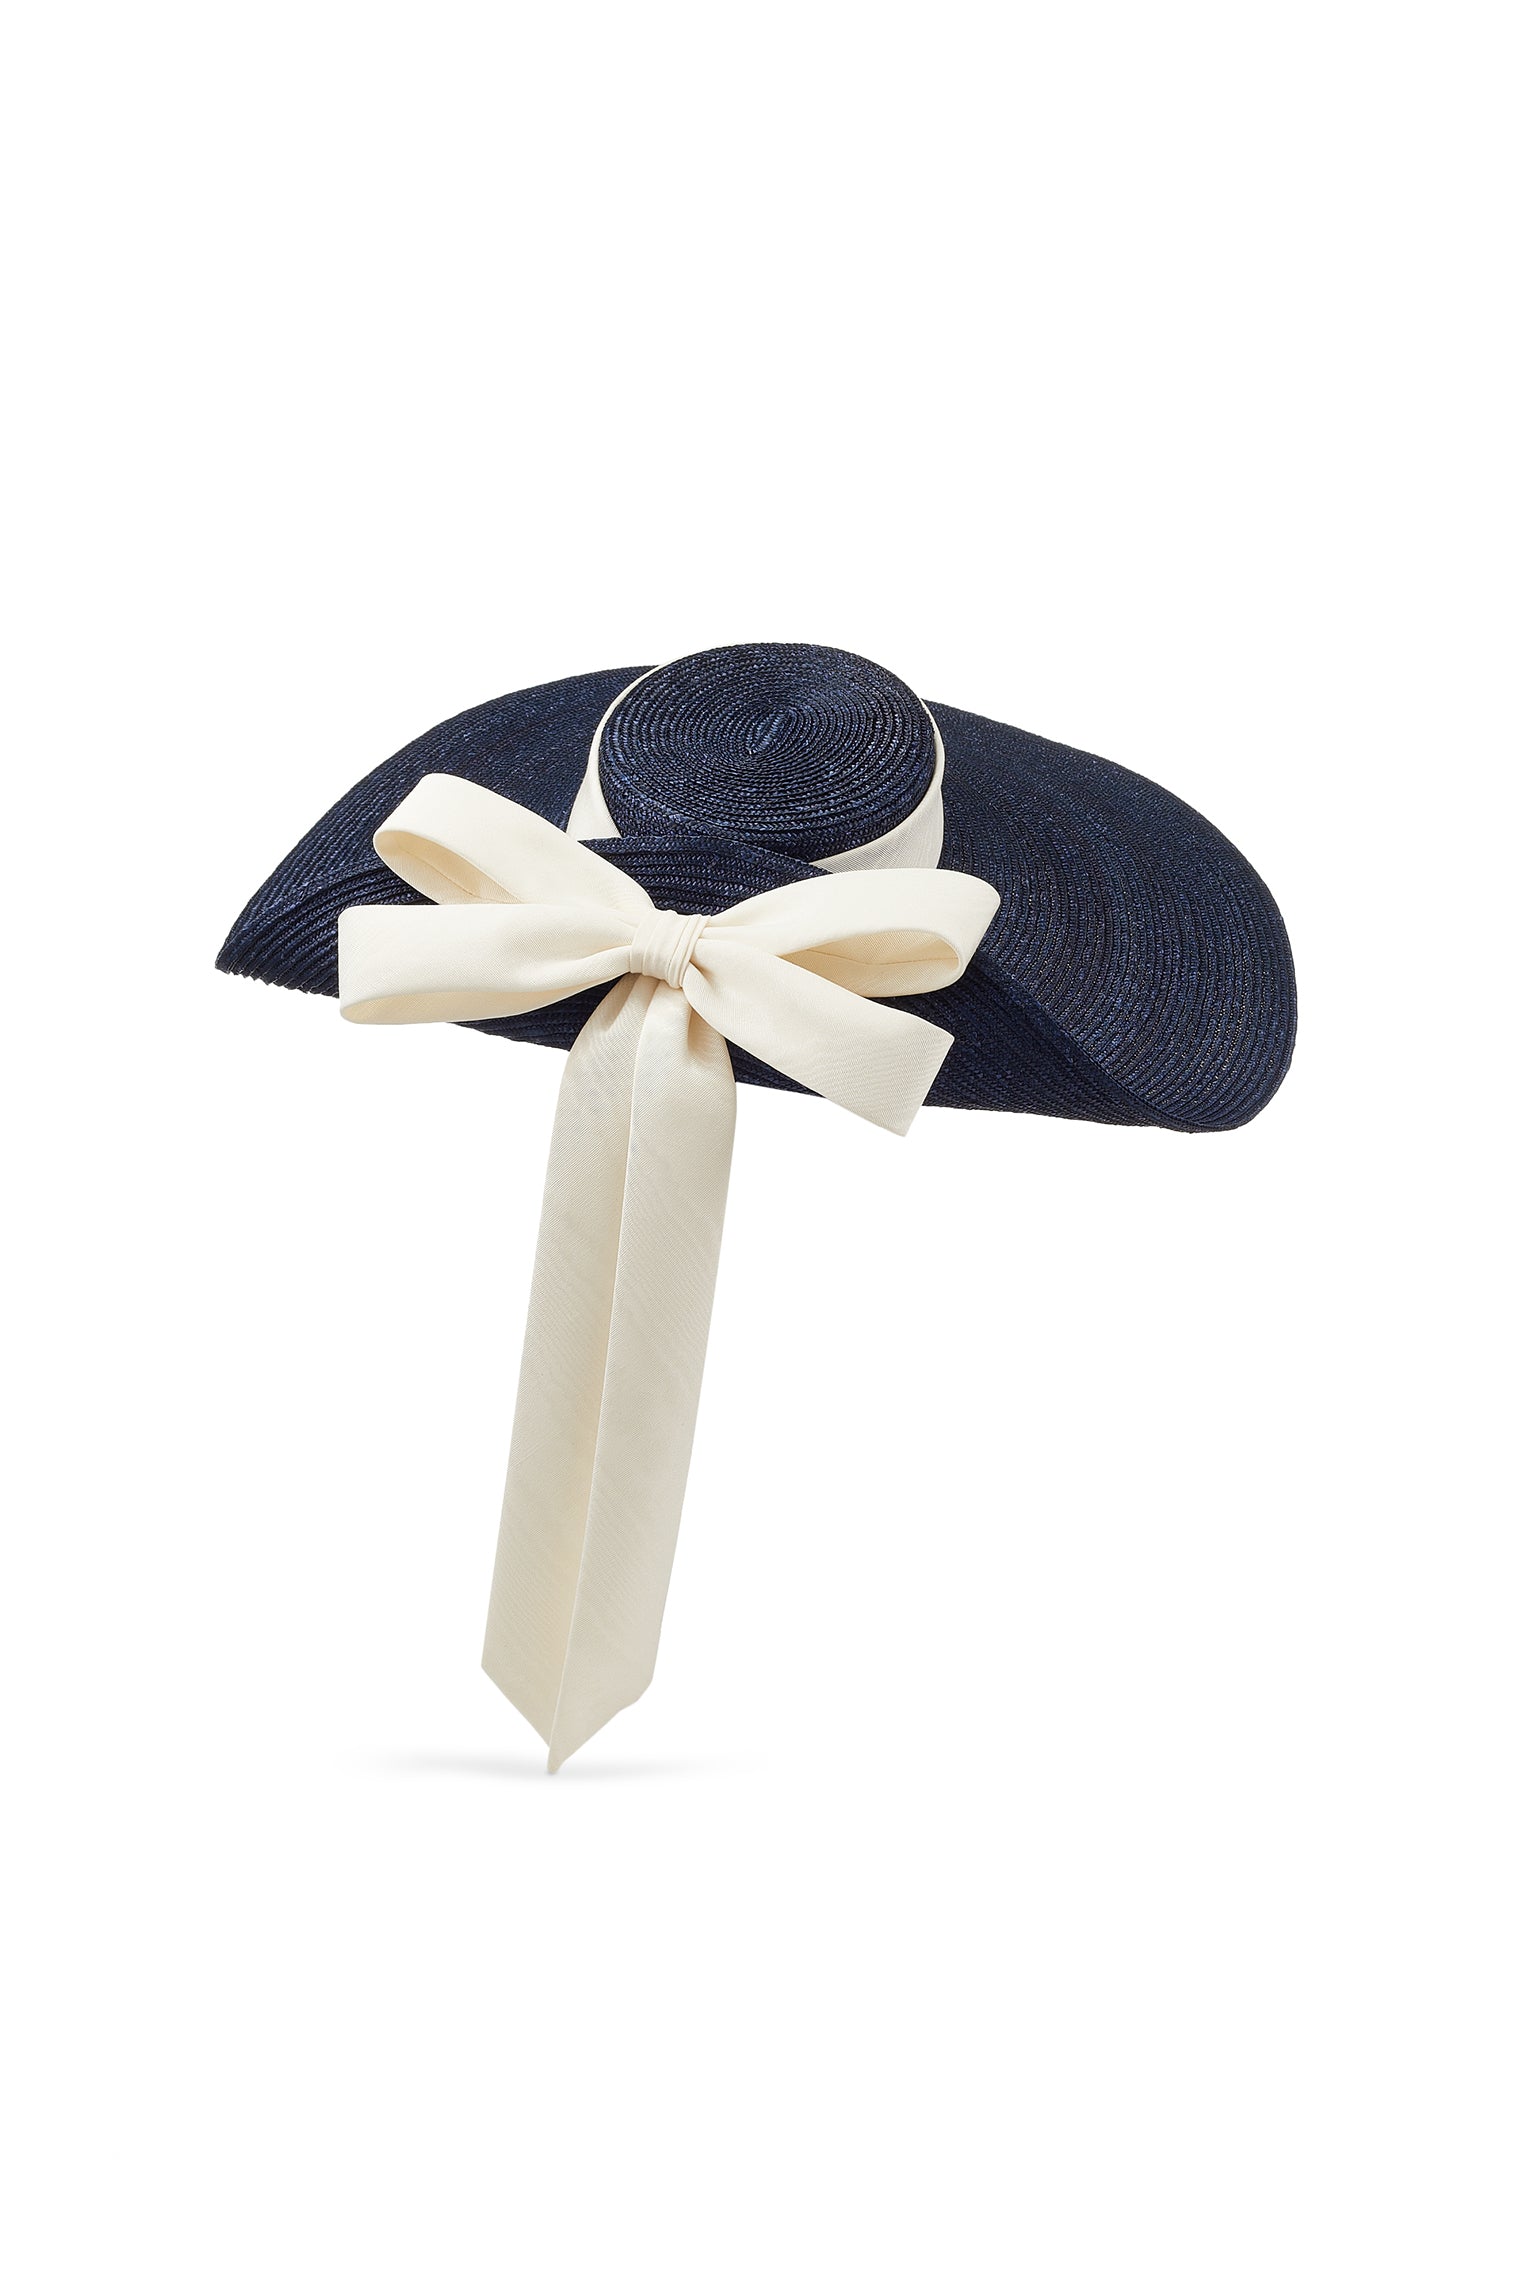 Lady Grey Navy Wide Brim Hat - Panamas, Straw and Sun Hats for Women - Lock & Co. Hatters London UK